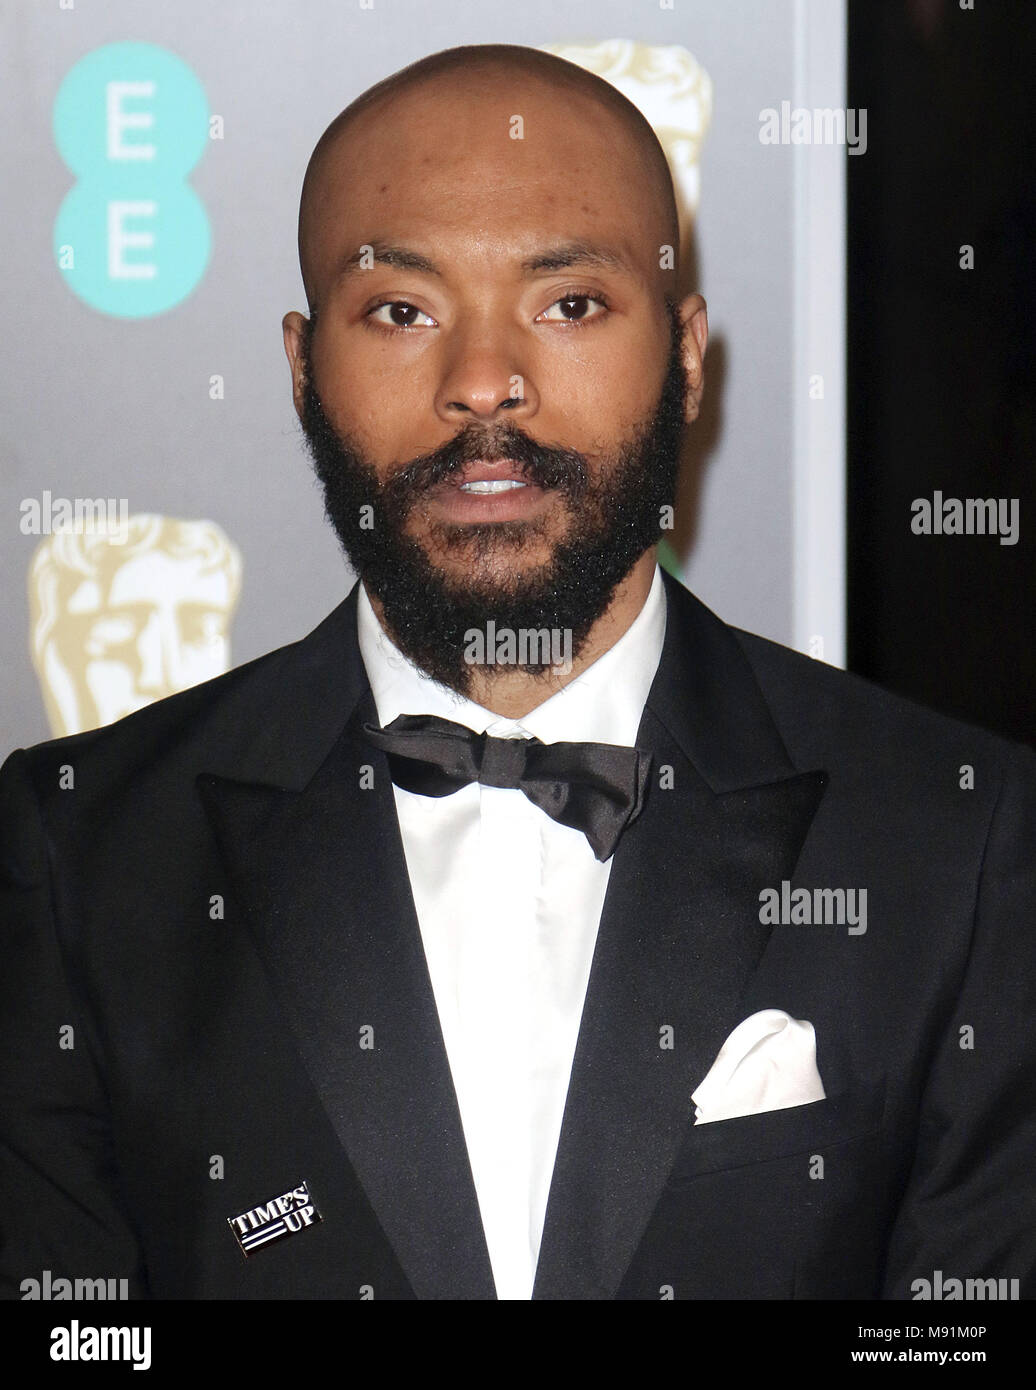 Feb 18, 2018  - Chiwetel Ejiofor attending EE British Academy Film Awards 2018 at Royal Albert Hall in London, England, UK Stock Photo